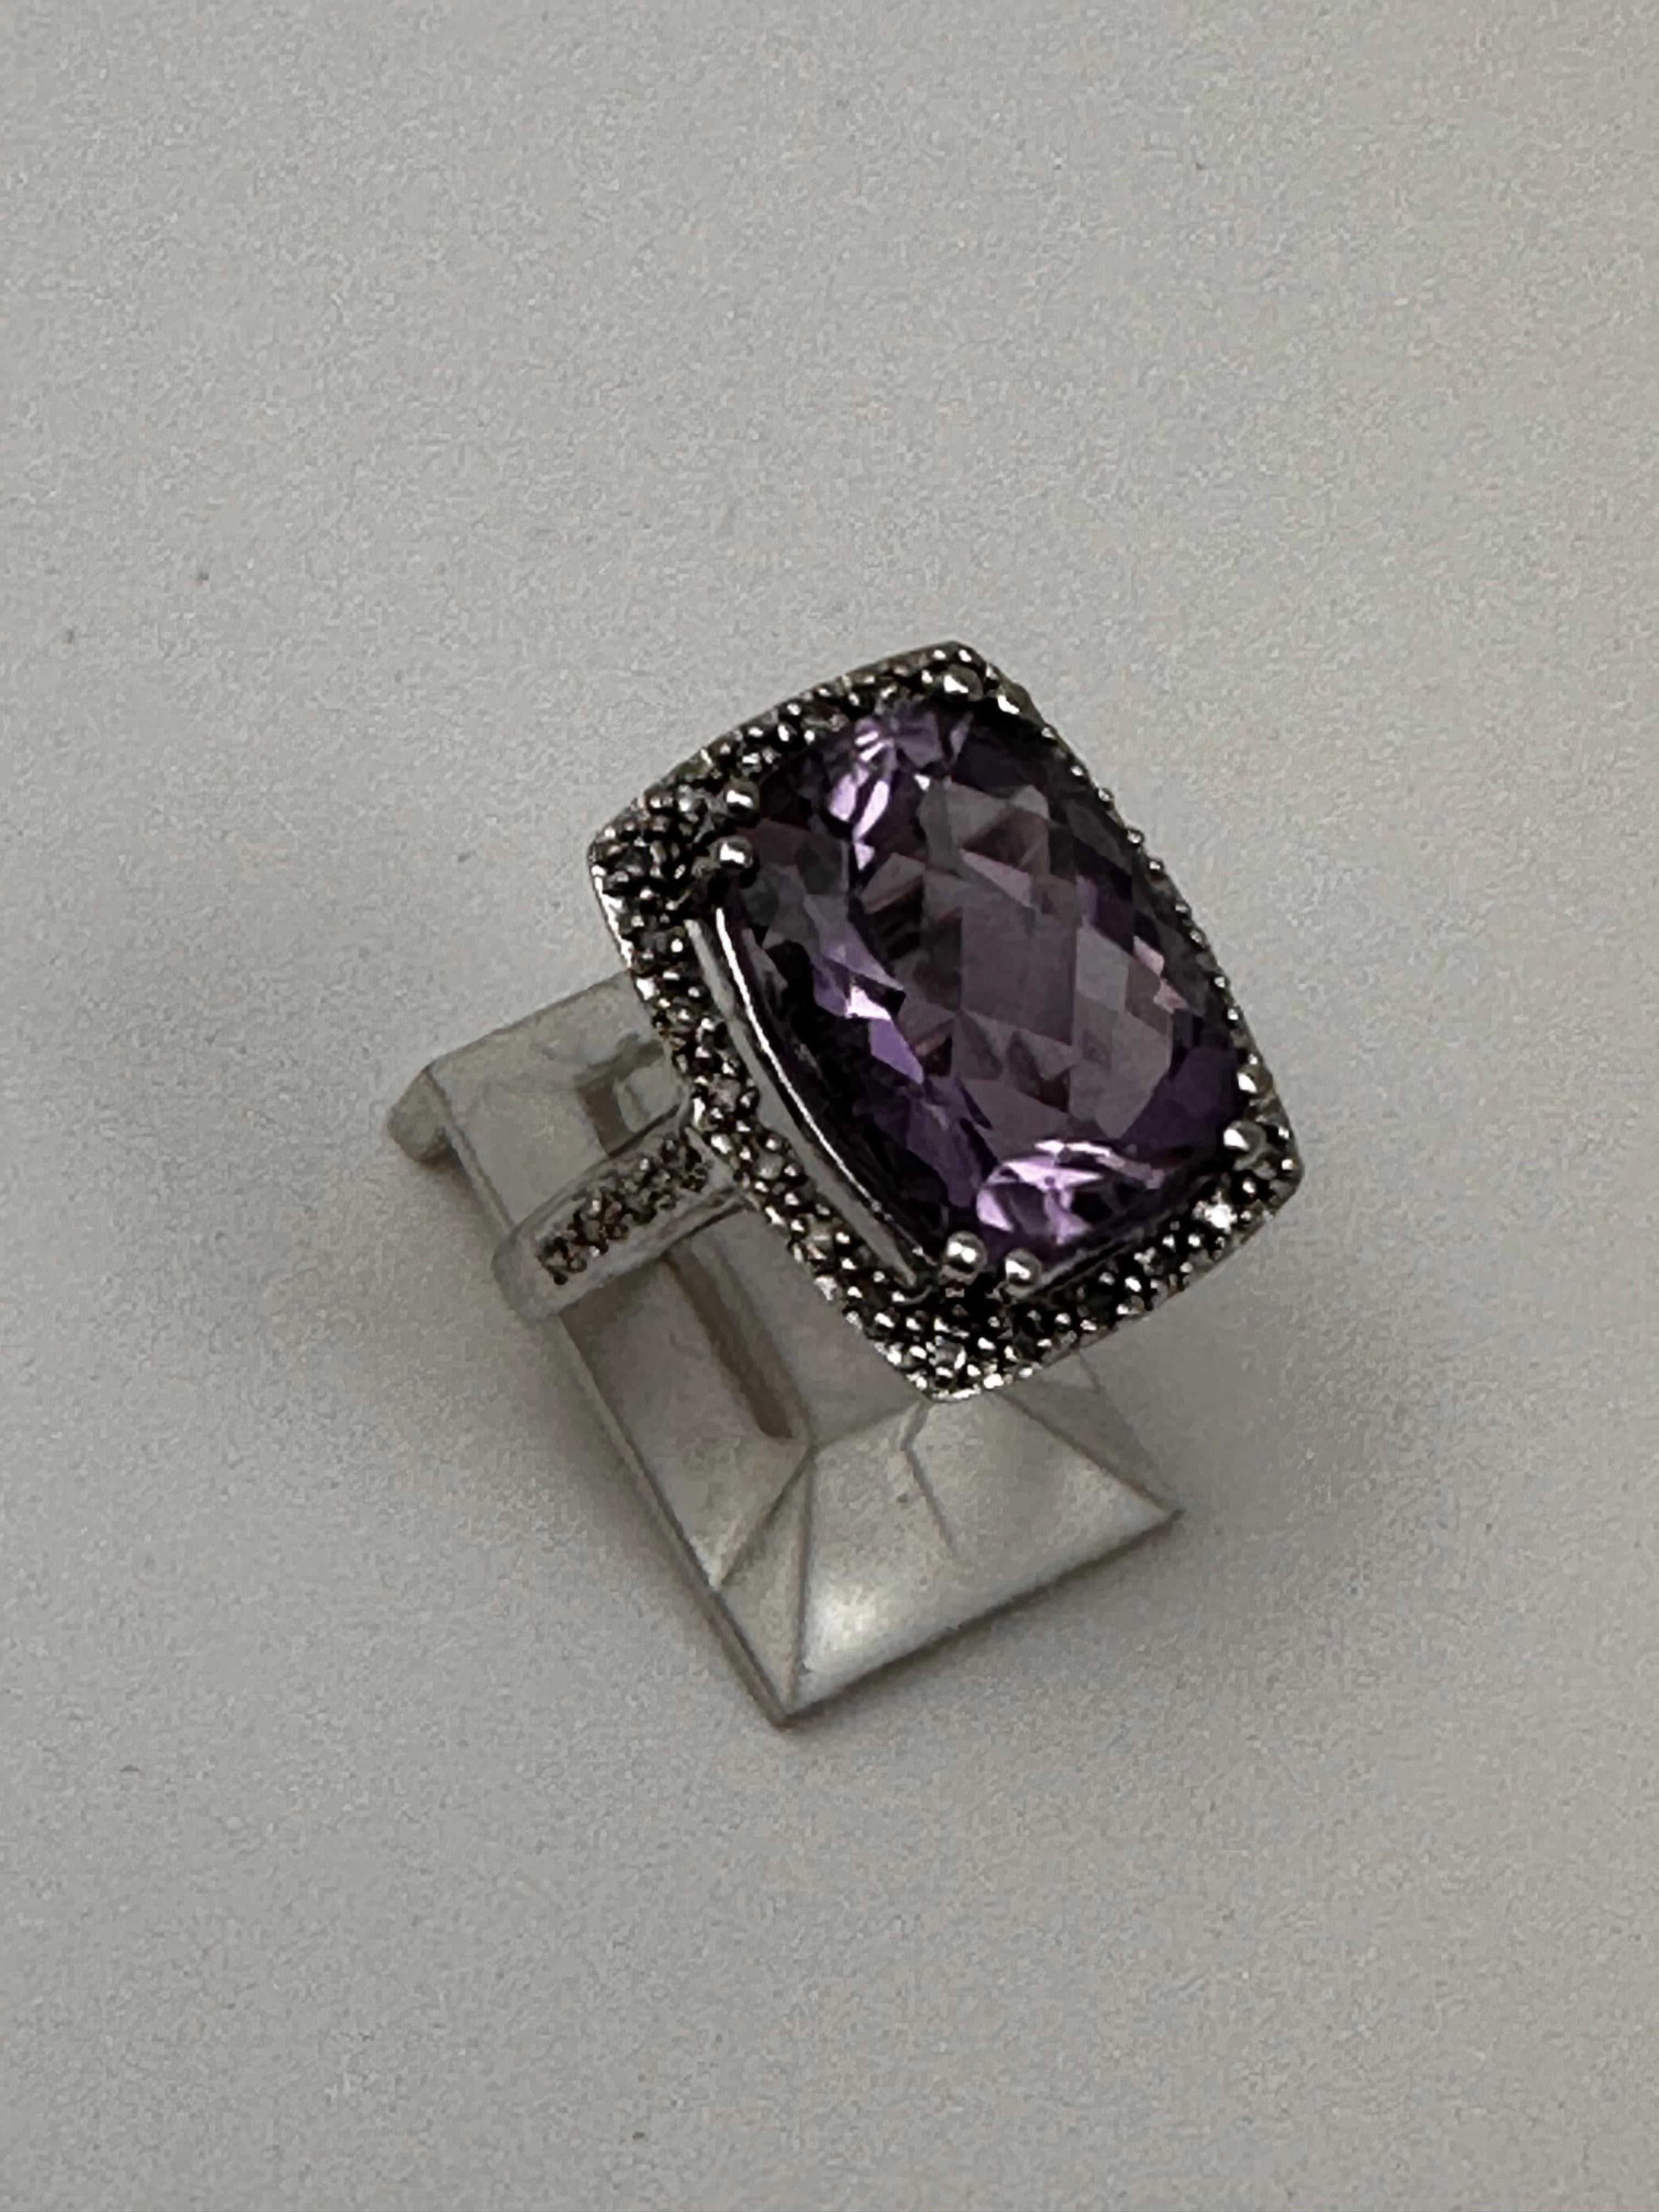 Women's 10kt White Gold 11mm x 15mm Cushion Cut Amethyst and Diamond Ring Size 6 3/4 For Sale